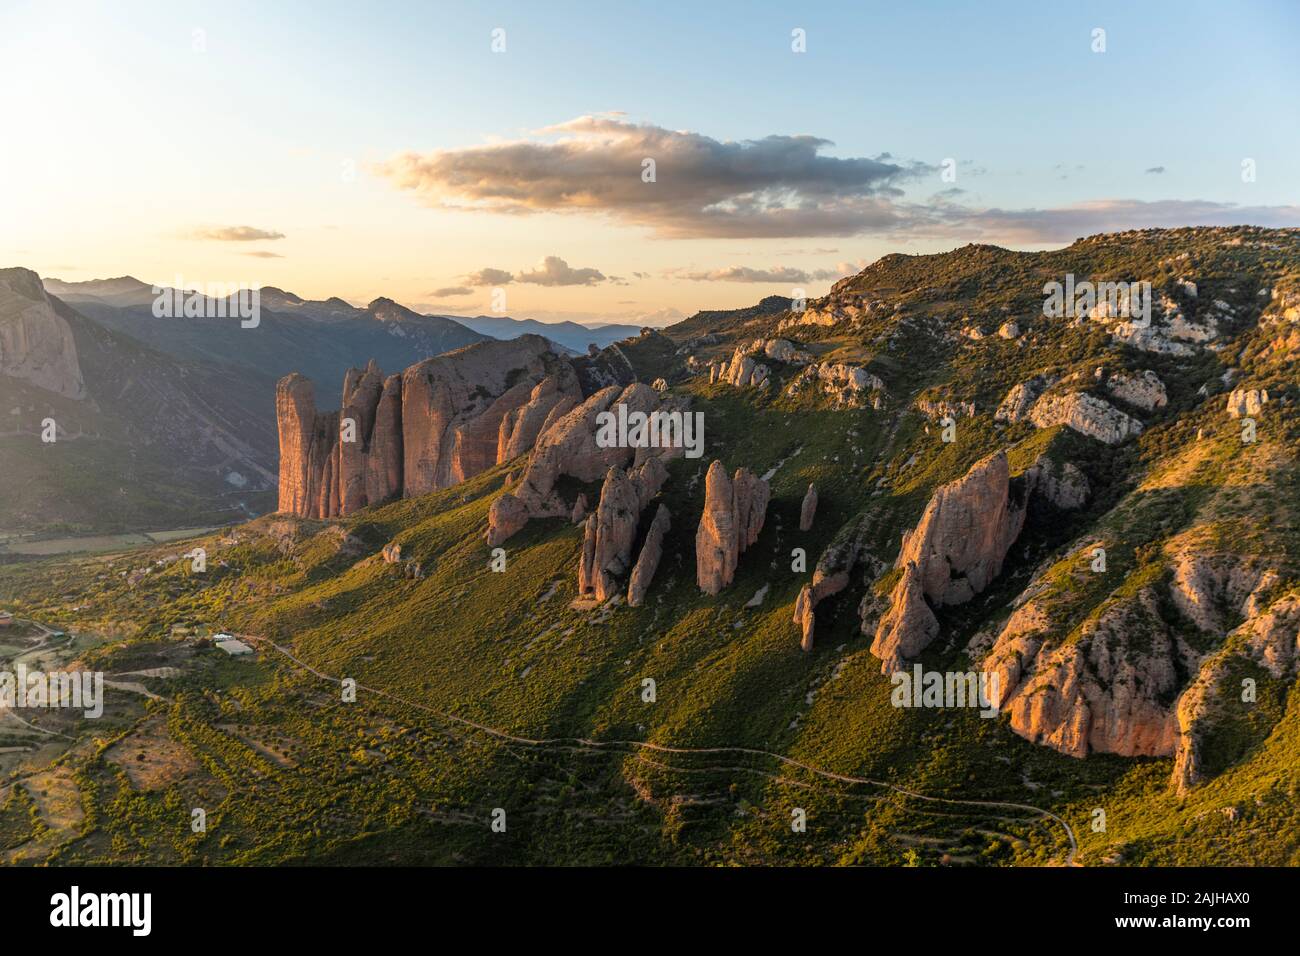 Mallos de Riglos, a set of conglomerate rock formations in Spain Stock Photo